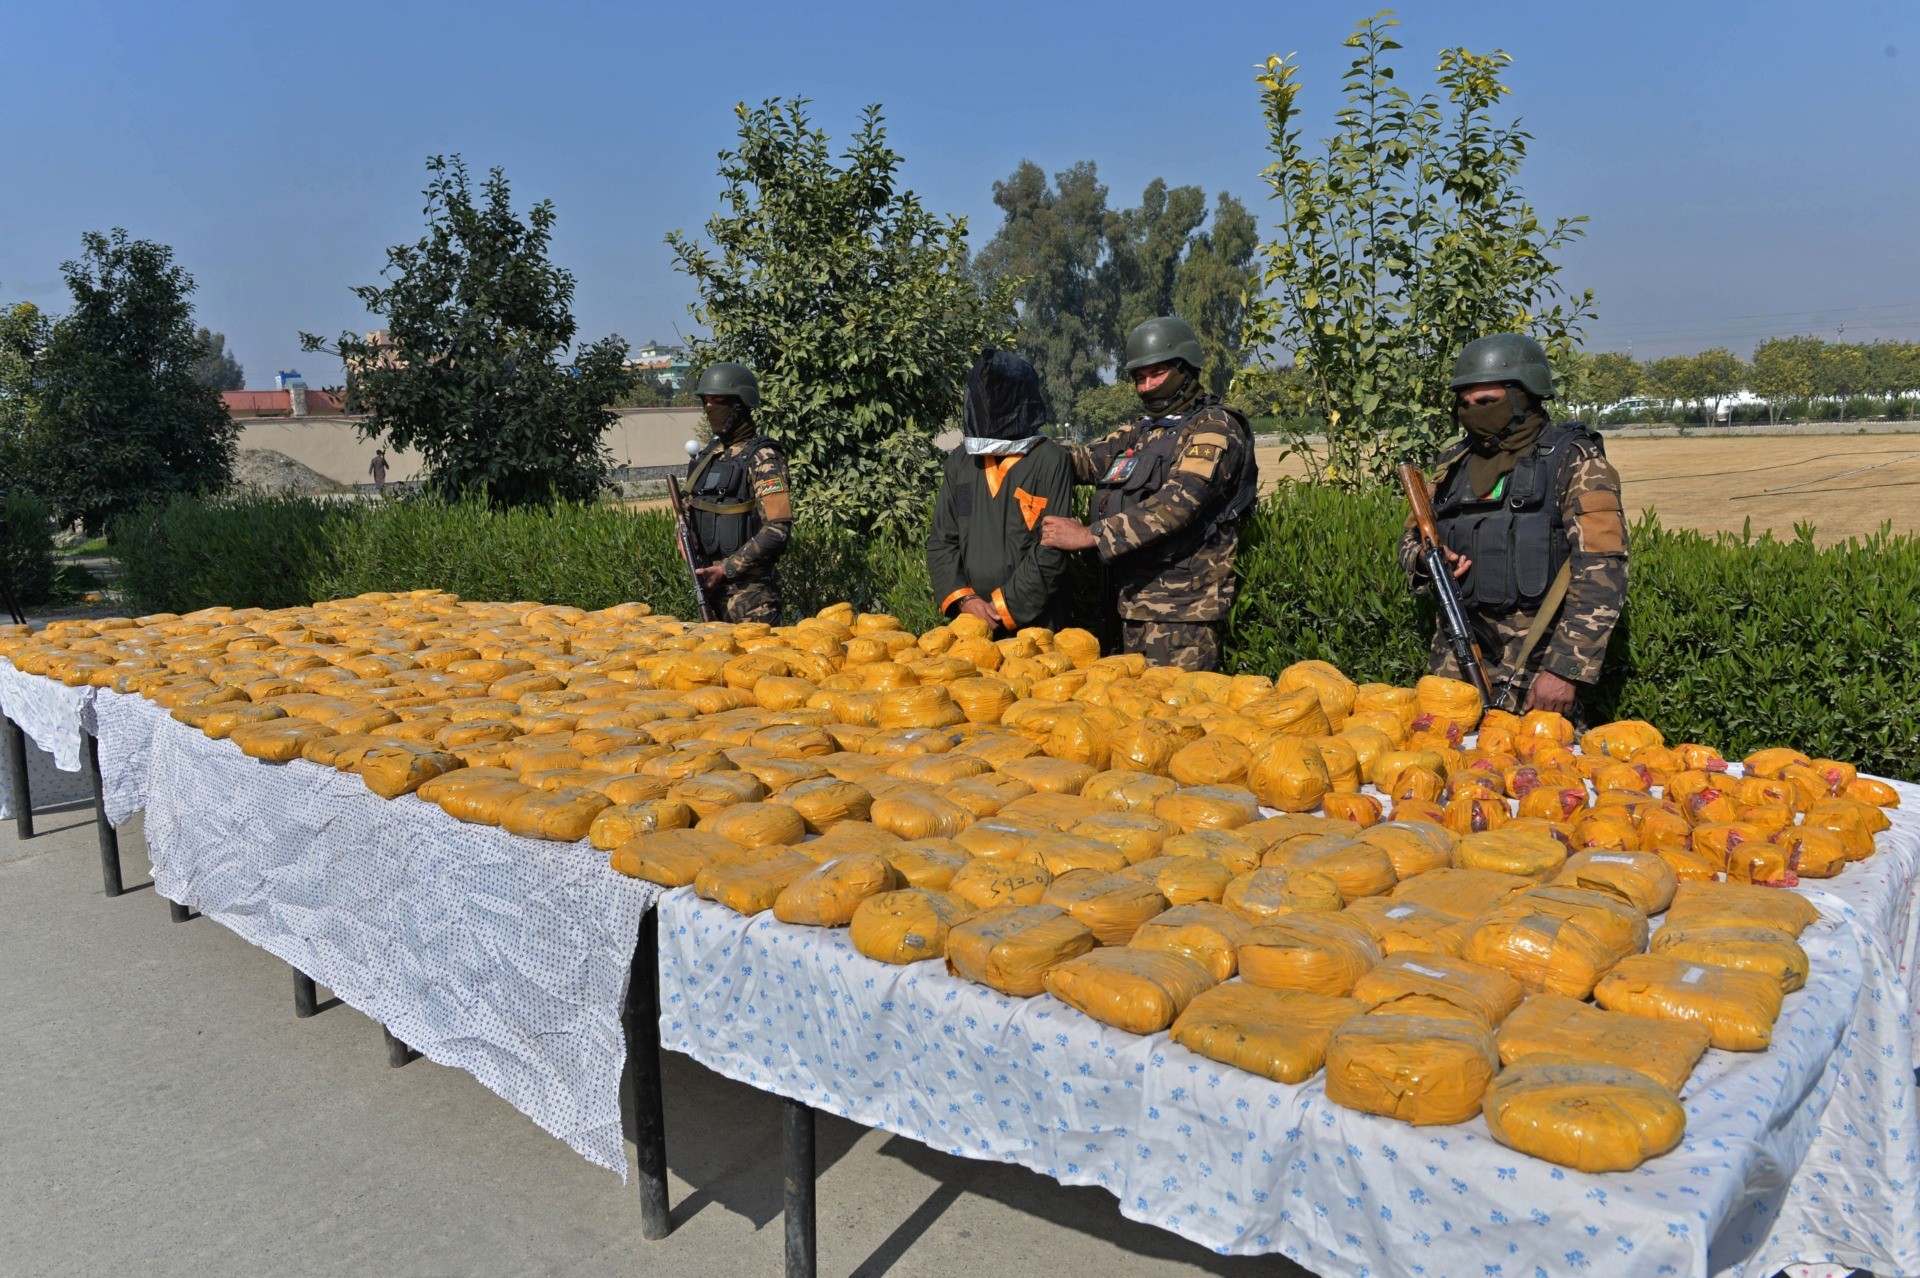 National Directorate of Security (NDS) forces stand guard along with a detained suspect (C) after bags containing Opium and Hashish were seized in an operation during a press conference at NDS headquarters in Jalalabad on February 4, 2021. (Photo by NOORULLAH SHIRZADA / AFP) (Photo by NOORULLAH SHIRZADA/AFP via Getty Images)